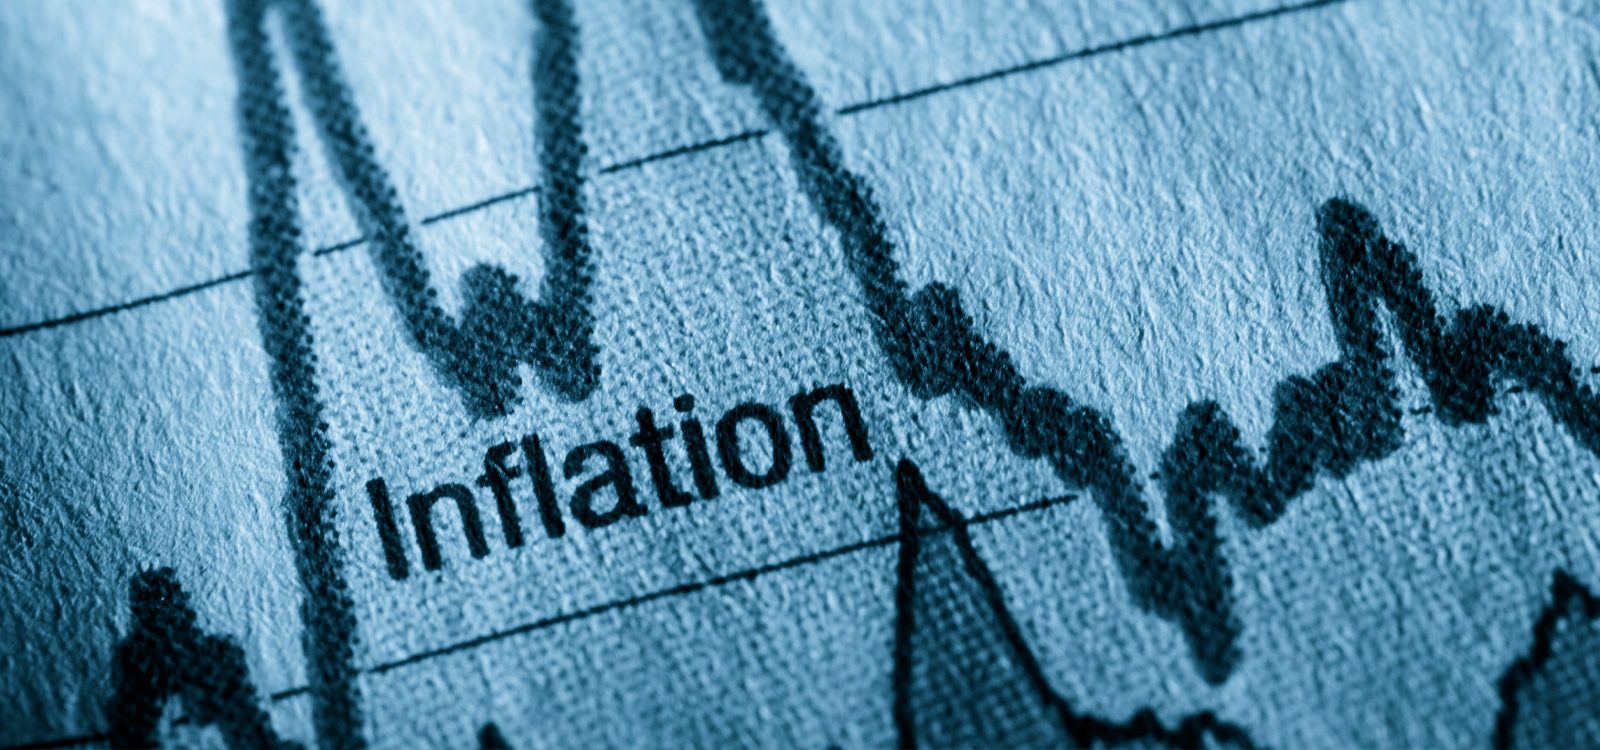 Post-Budget economic briefing outlines opportunities and risks during high inflation